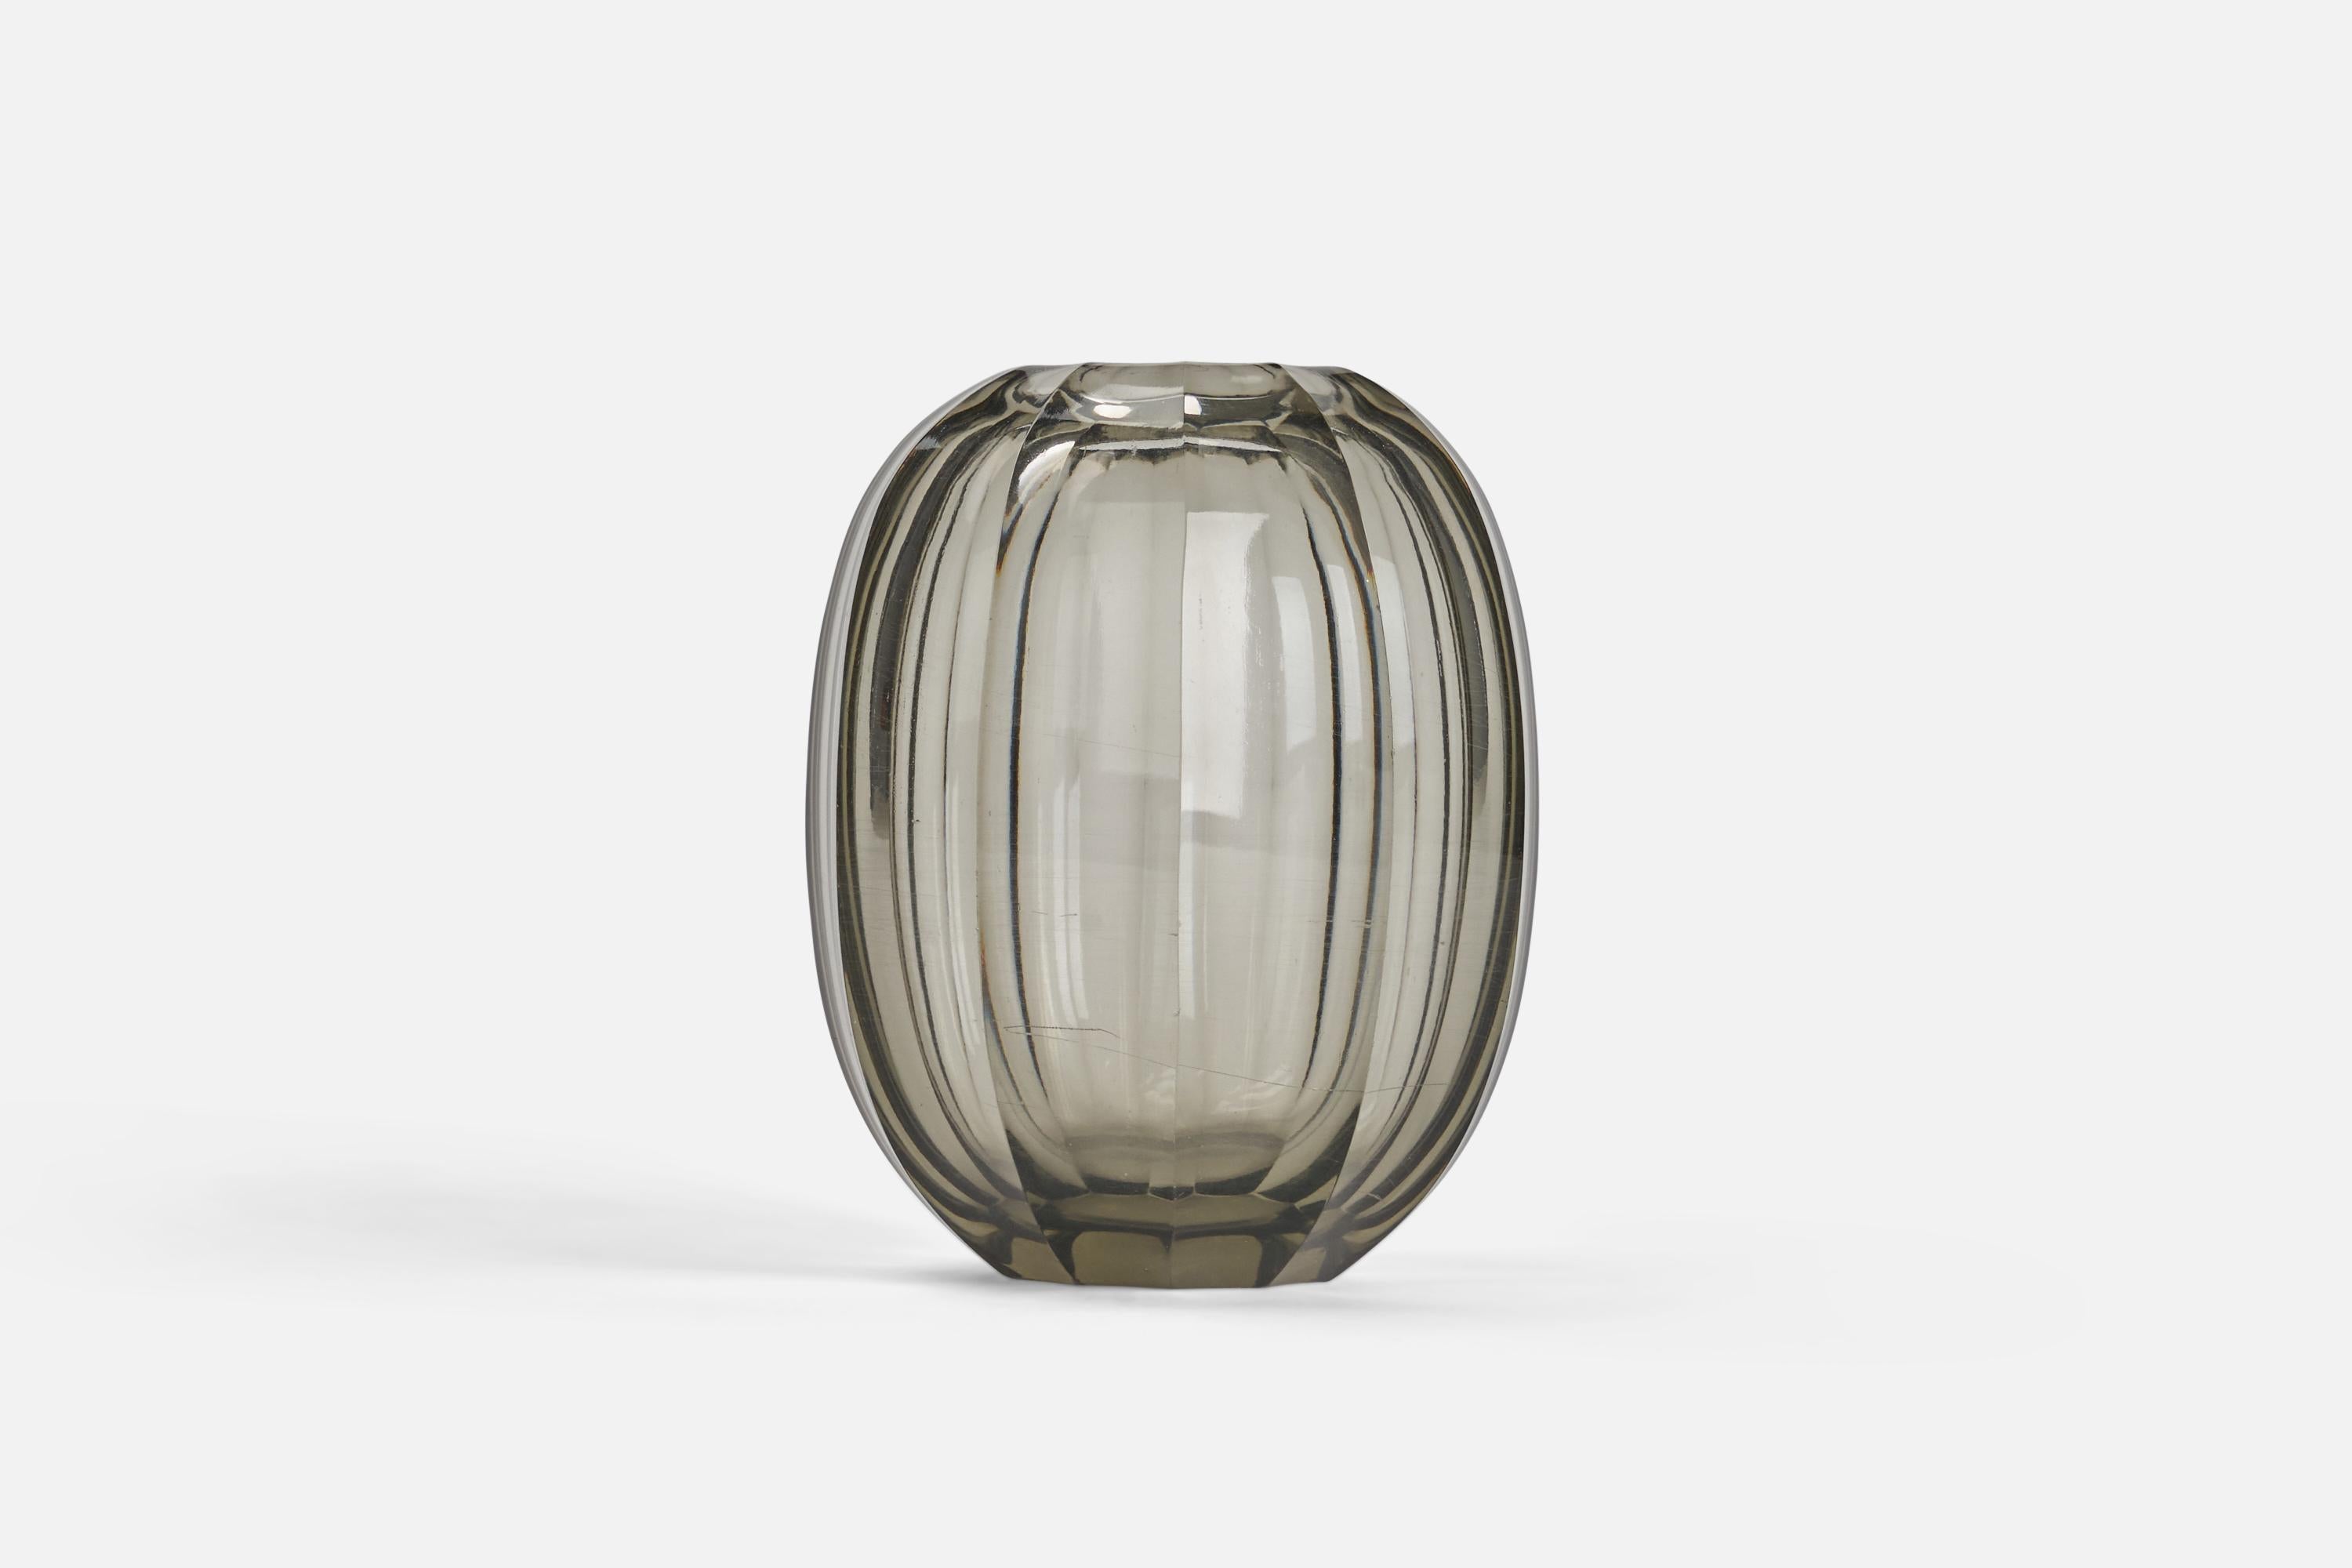 A smoked glass vase designed by Simon Gate and produced by Orrefors, Sweden, 1940s.